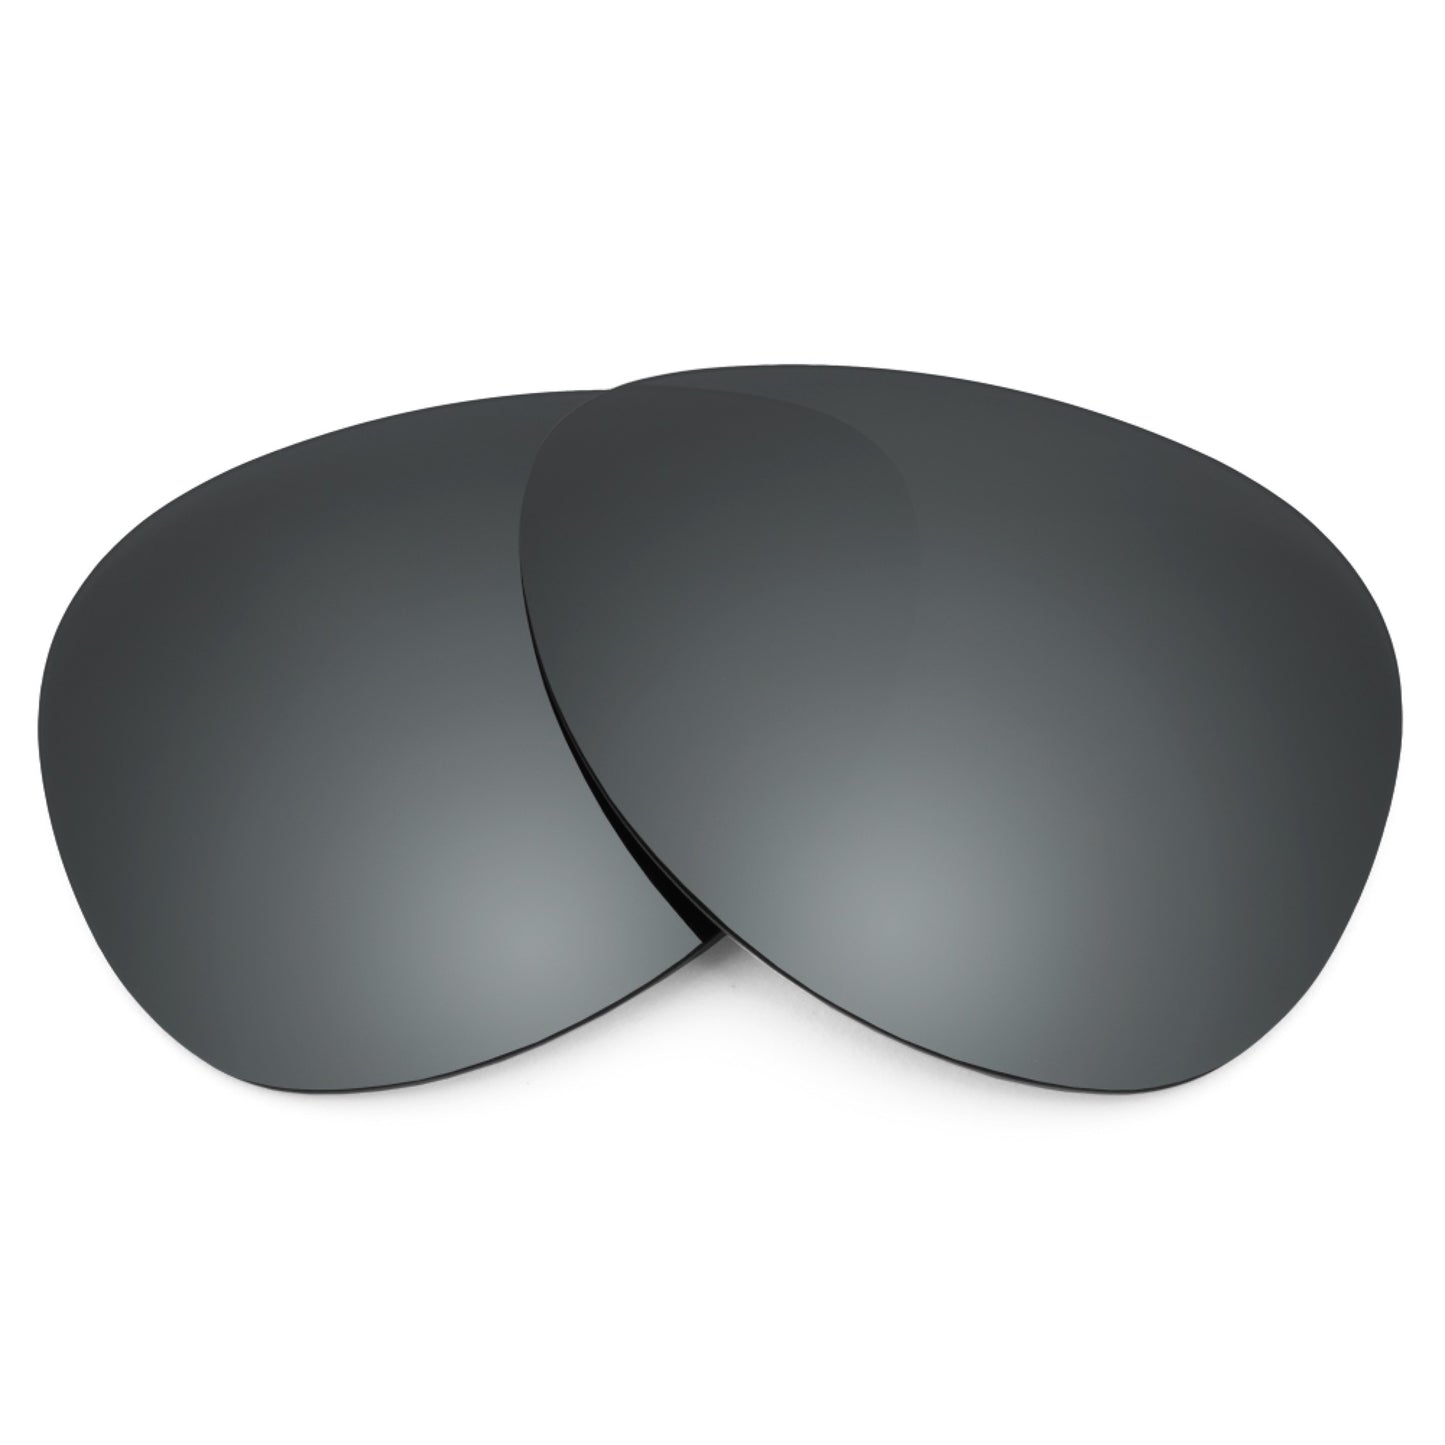 Revant replacement lenses for Ray-Ban RB8307 55mm Non-Polarized Black Chrome